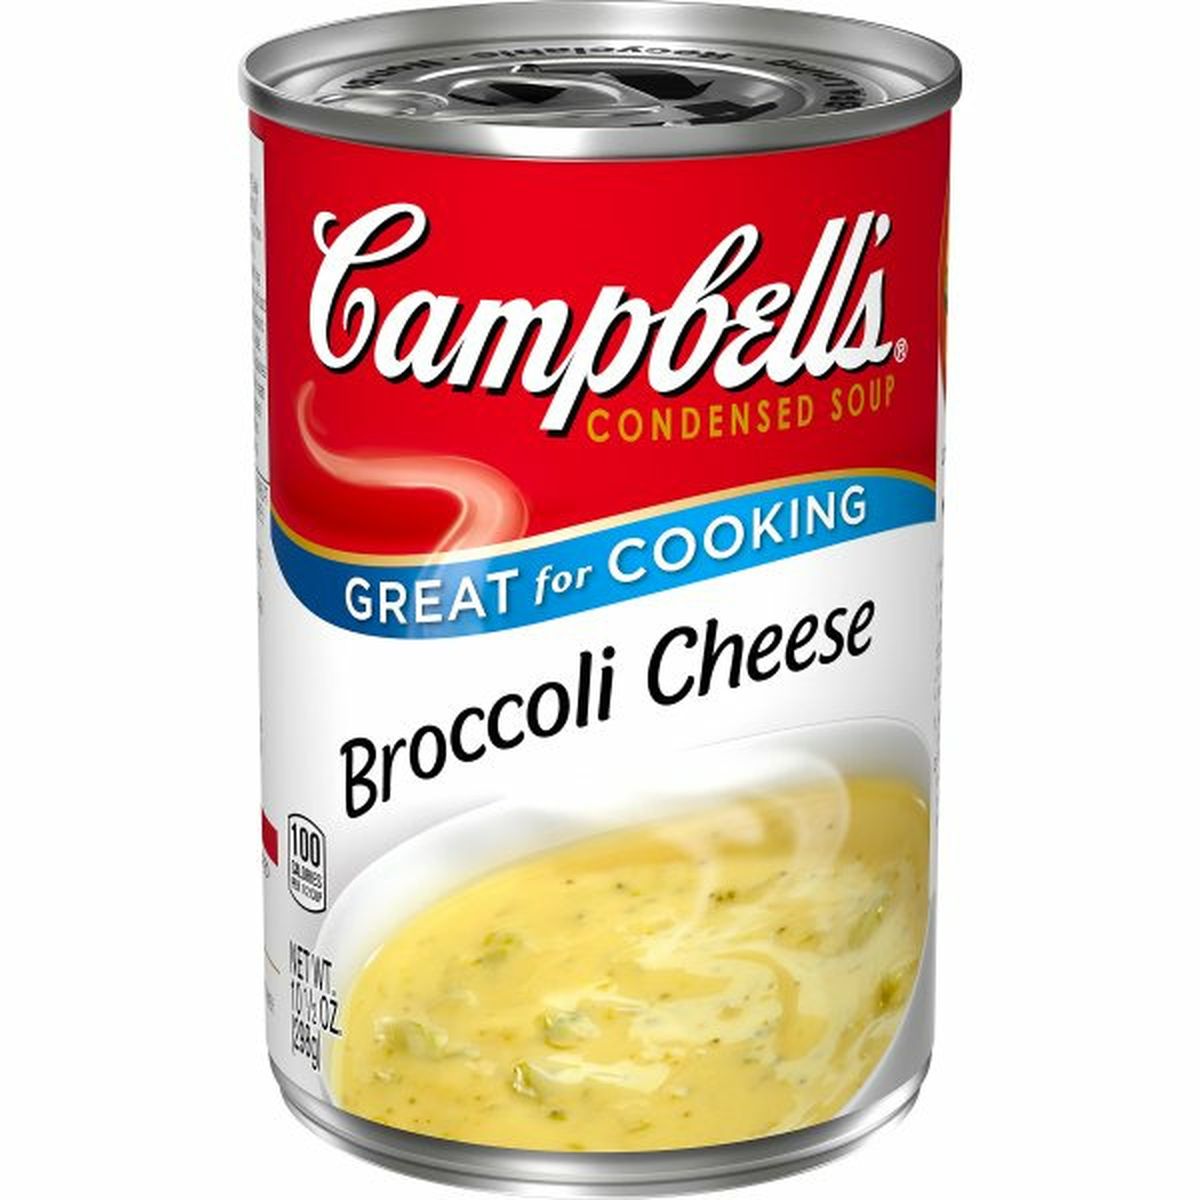 Calories in Campbell'ss Condensed Broccoli Cheese Soup